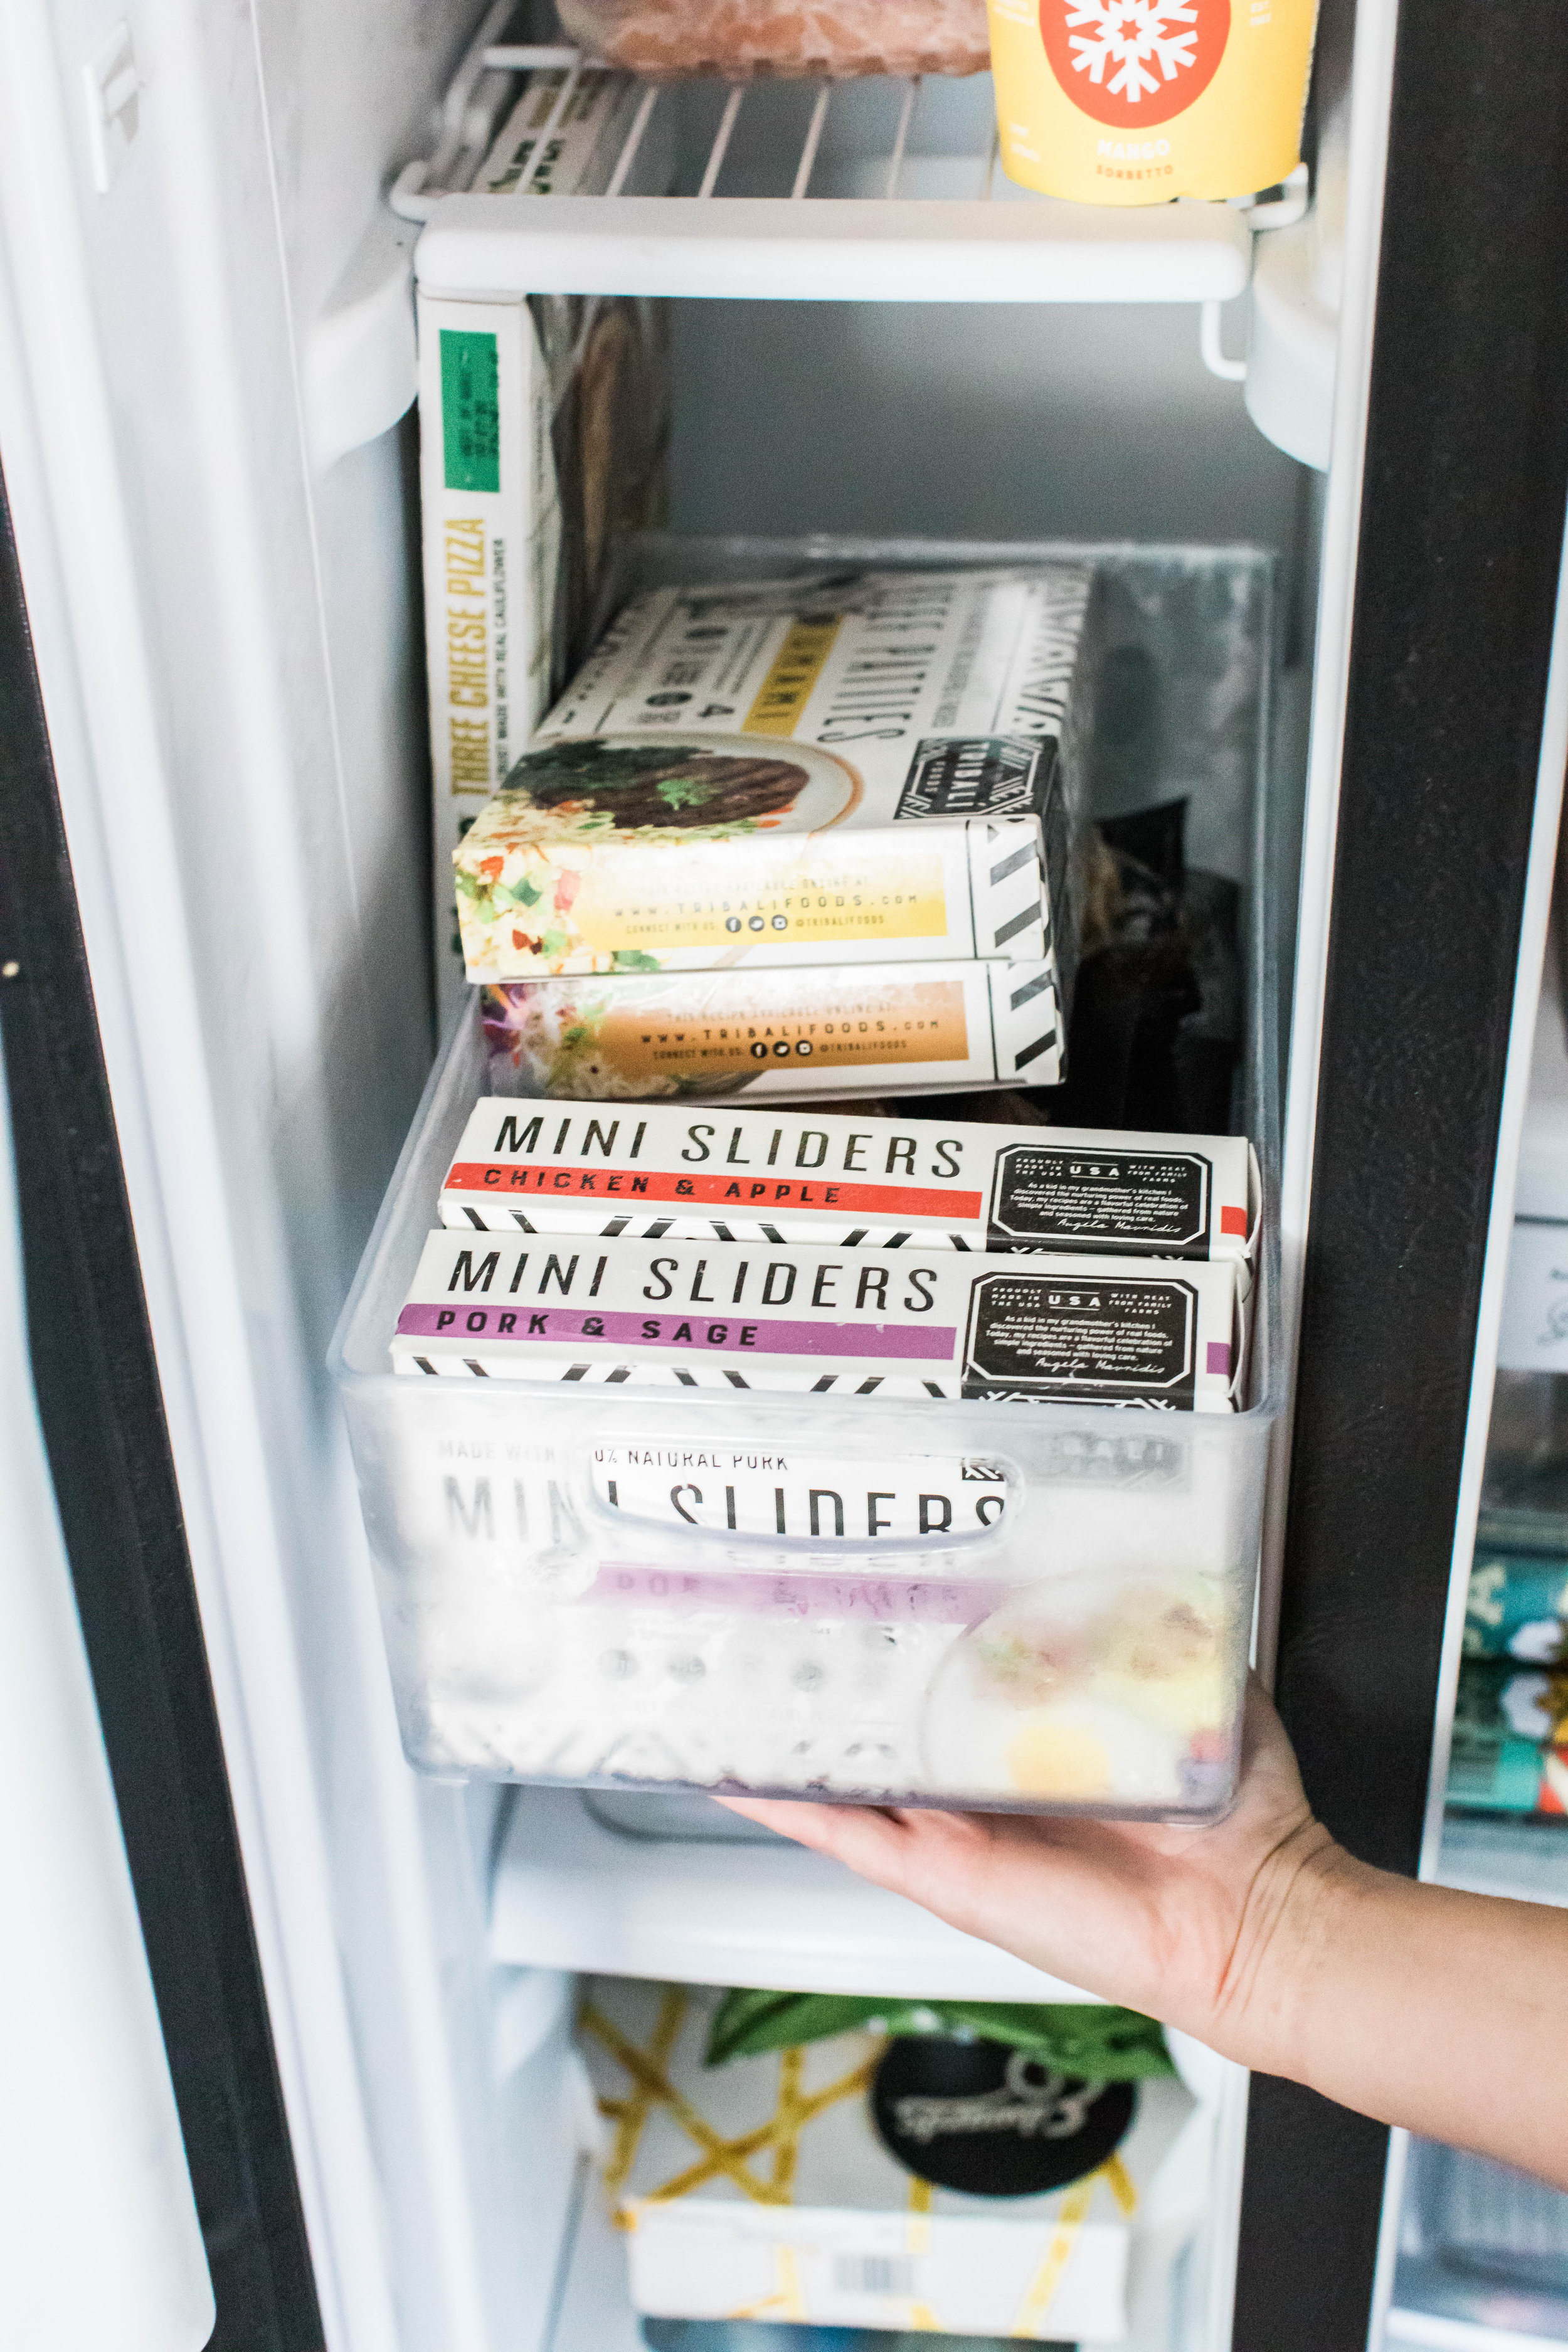 Tips for Organizing the Freezer and Keeping It Tidy, Organize the Freezer